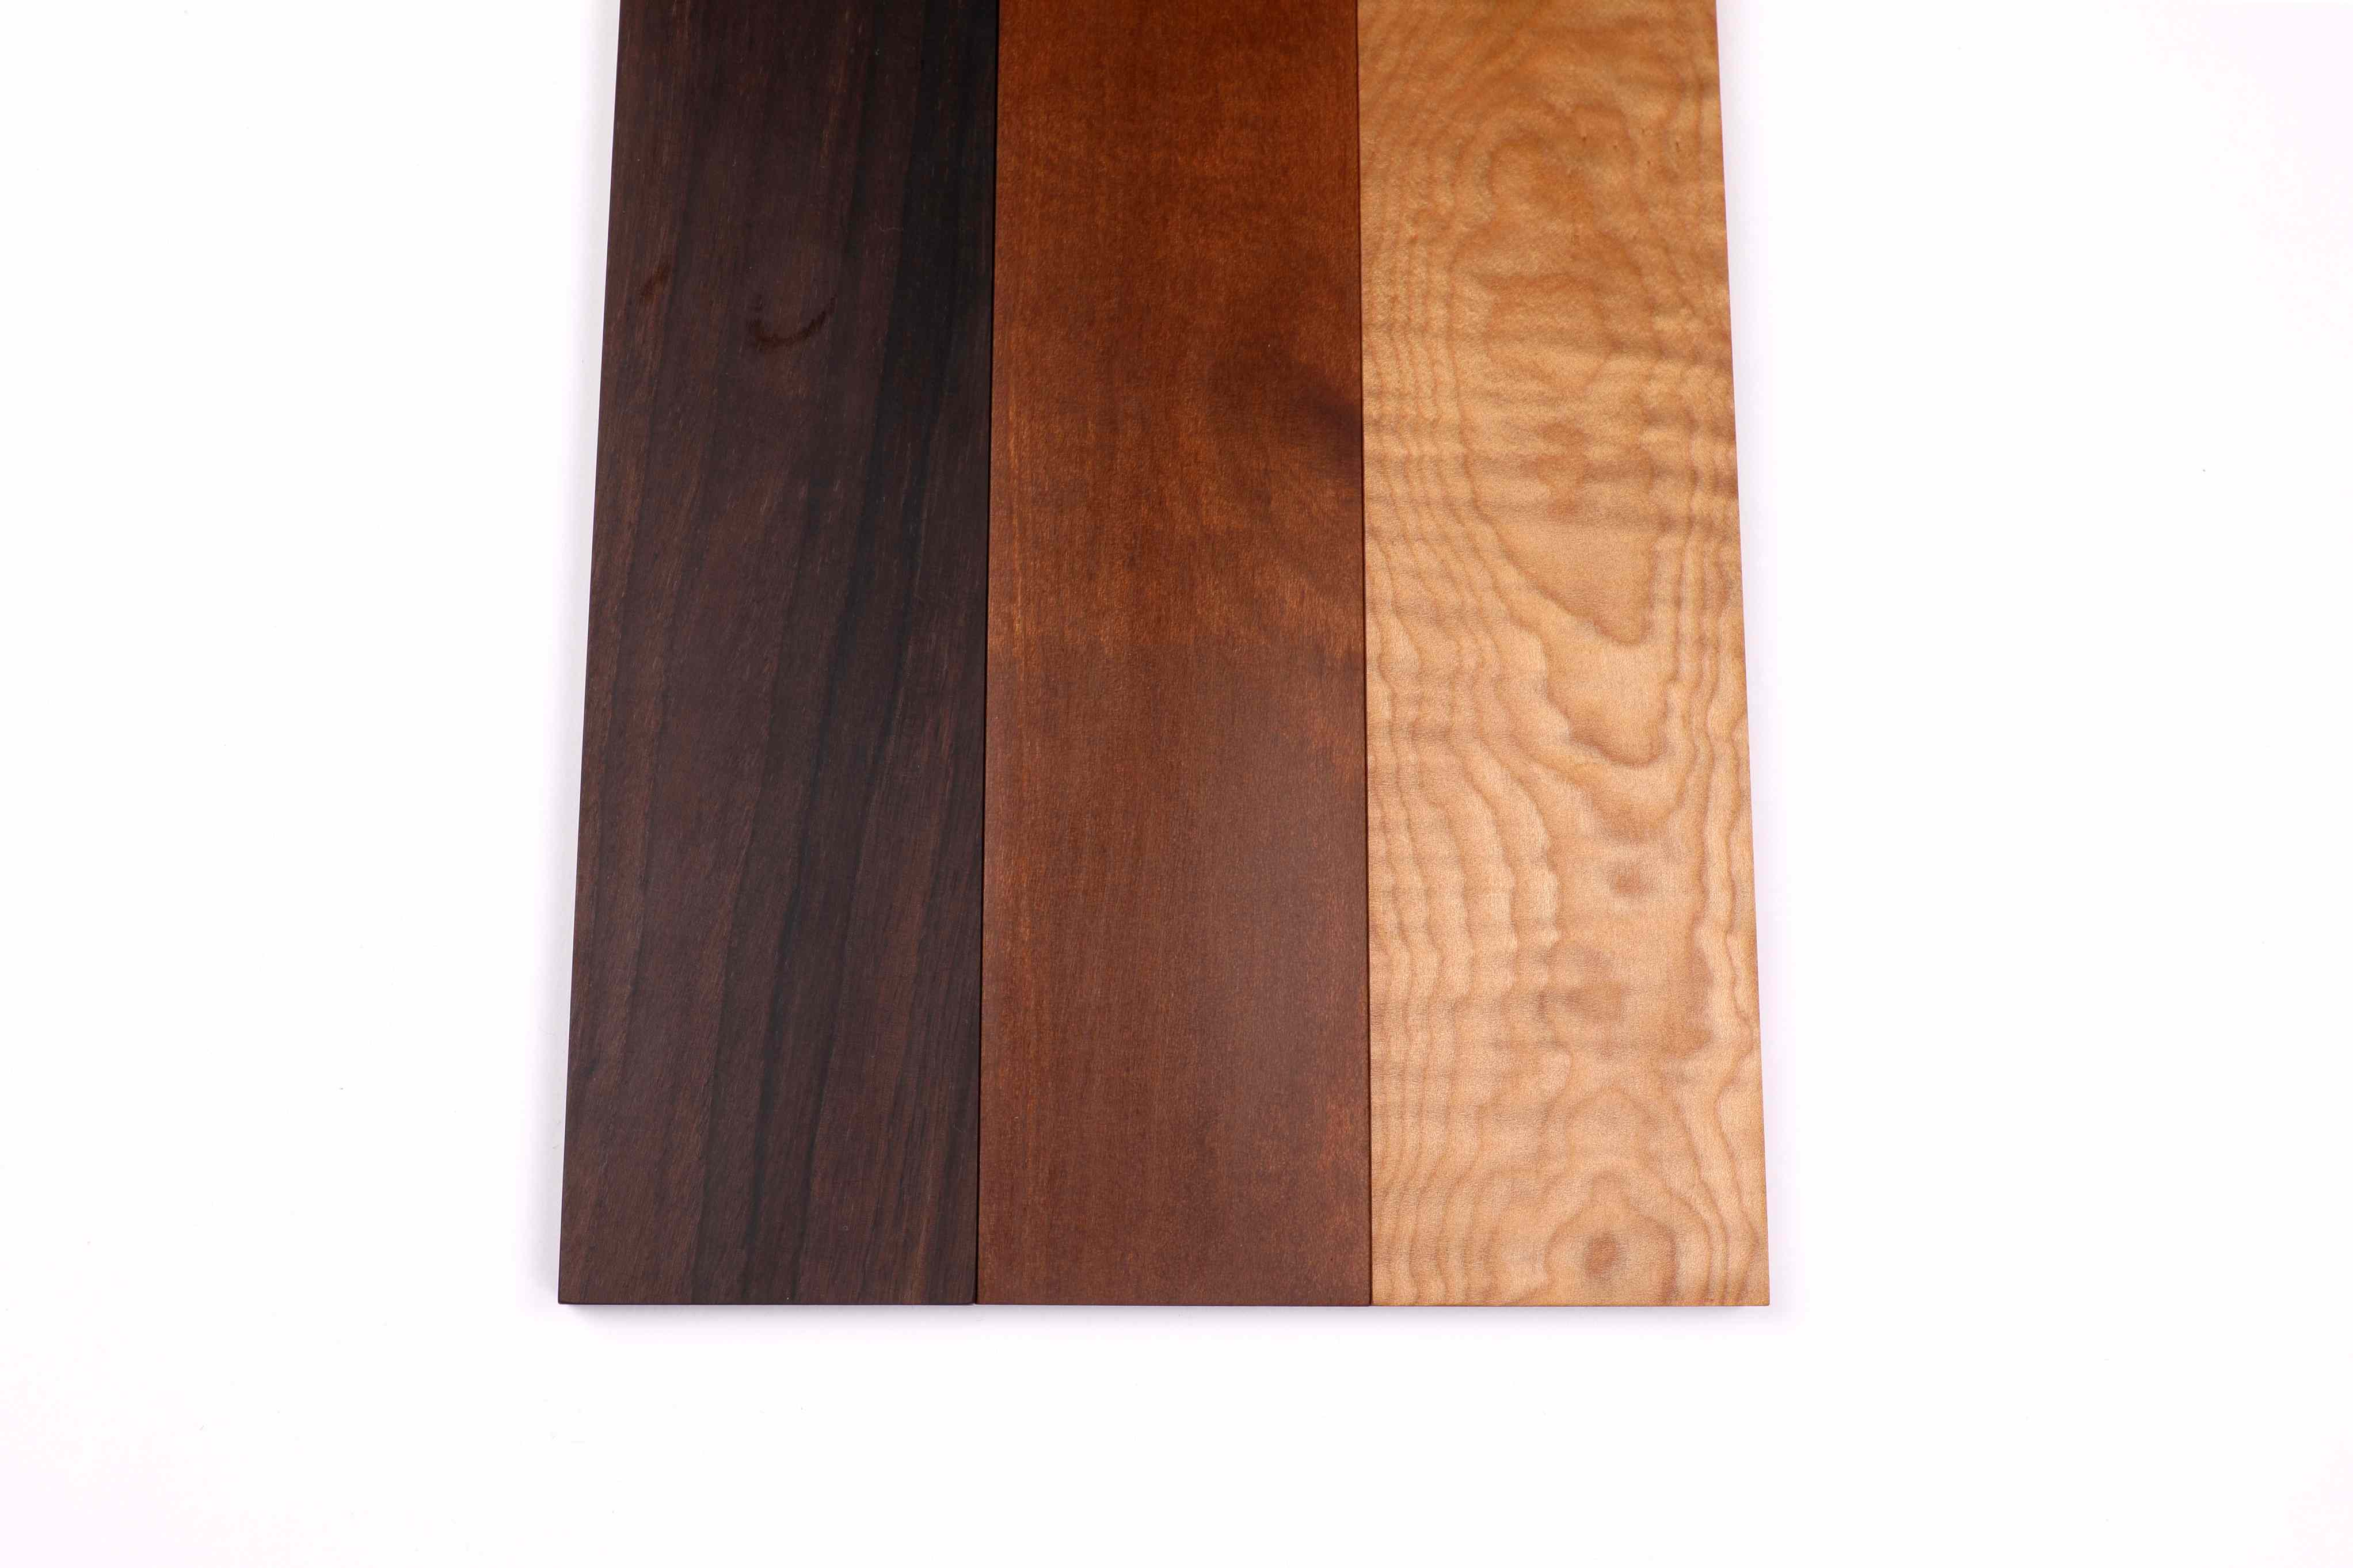 Fretboards from Sonowood walnut (left), maple (center) and flamed maple (right)